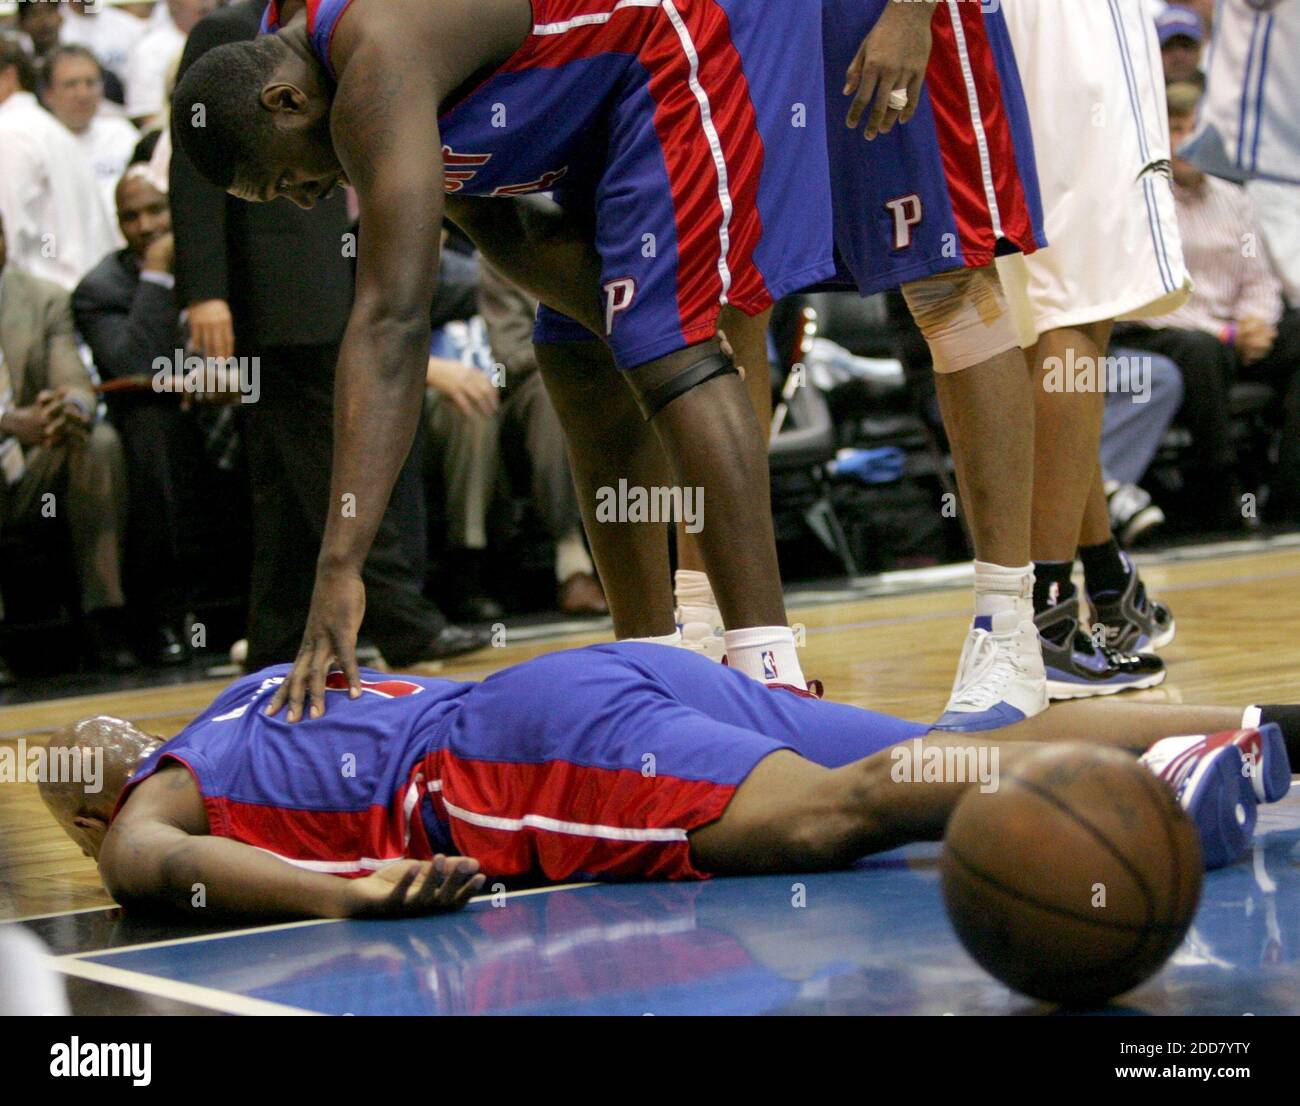 Detroit Pistons' Chauncey Billups lies on the floor after a foul by Orlando Magic's Jameer Nelson during first half action in Game 3 of the NBA Eastern Conference semifinals at the Amway Arena in Orlando, FL, USA on May 7, 2008. Photo by Gary W. Green/Orlando Sentinel/MCT/Cameleon/ABACAPRESS.COM Stock Photo